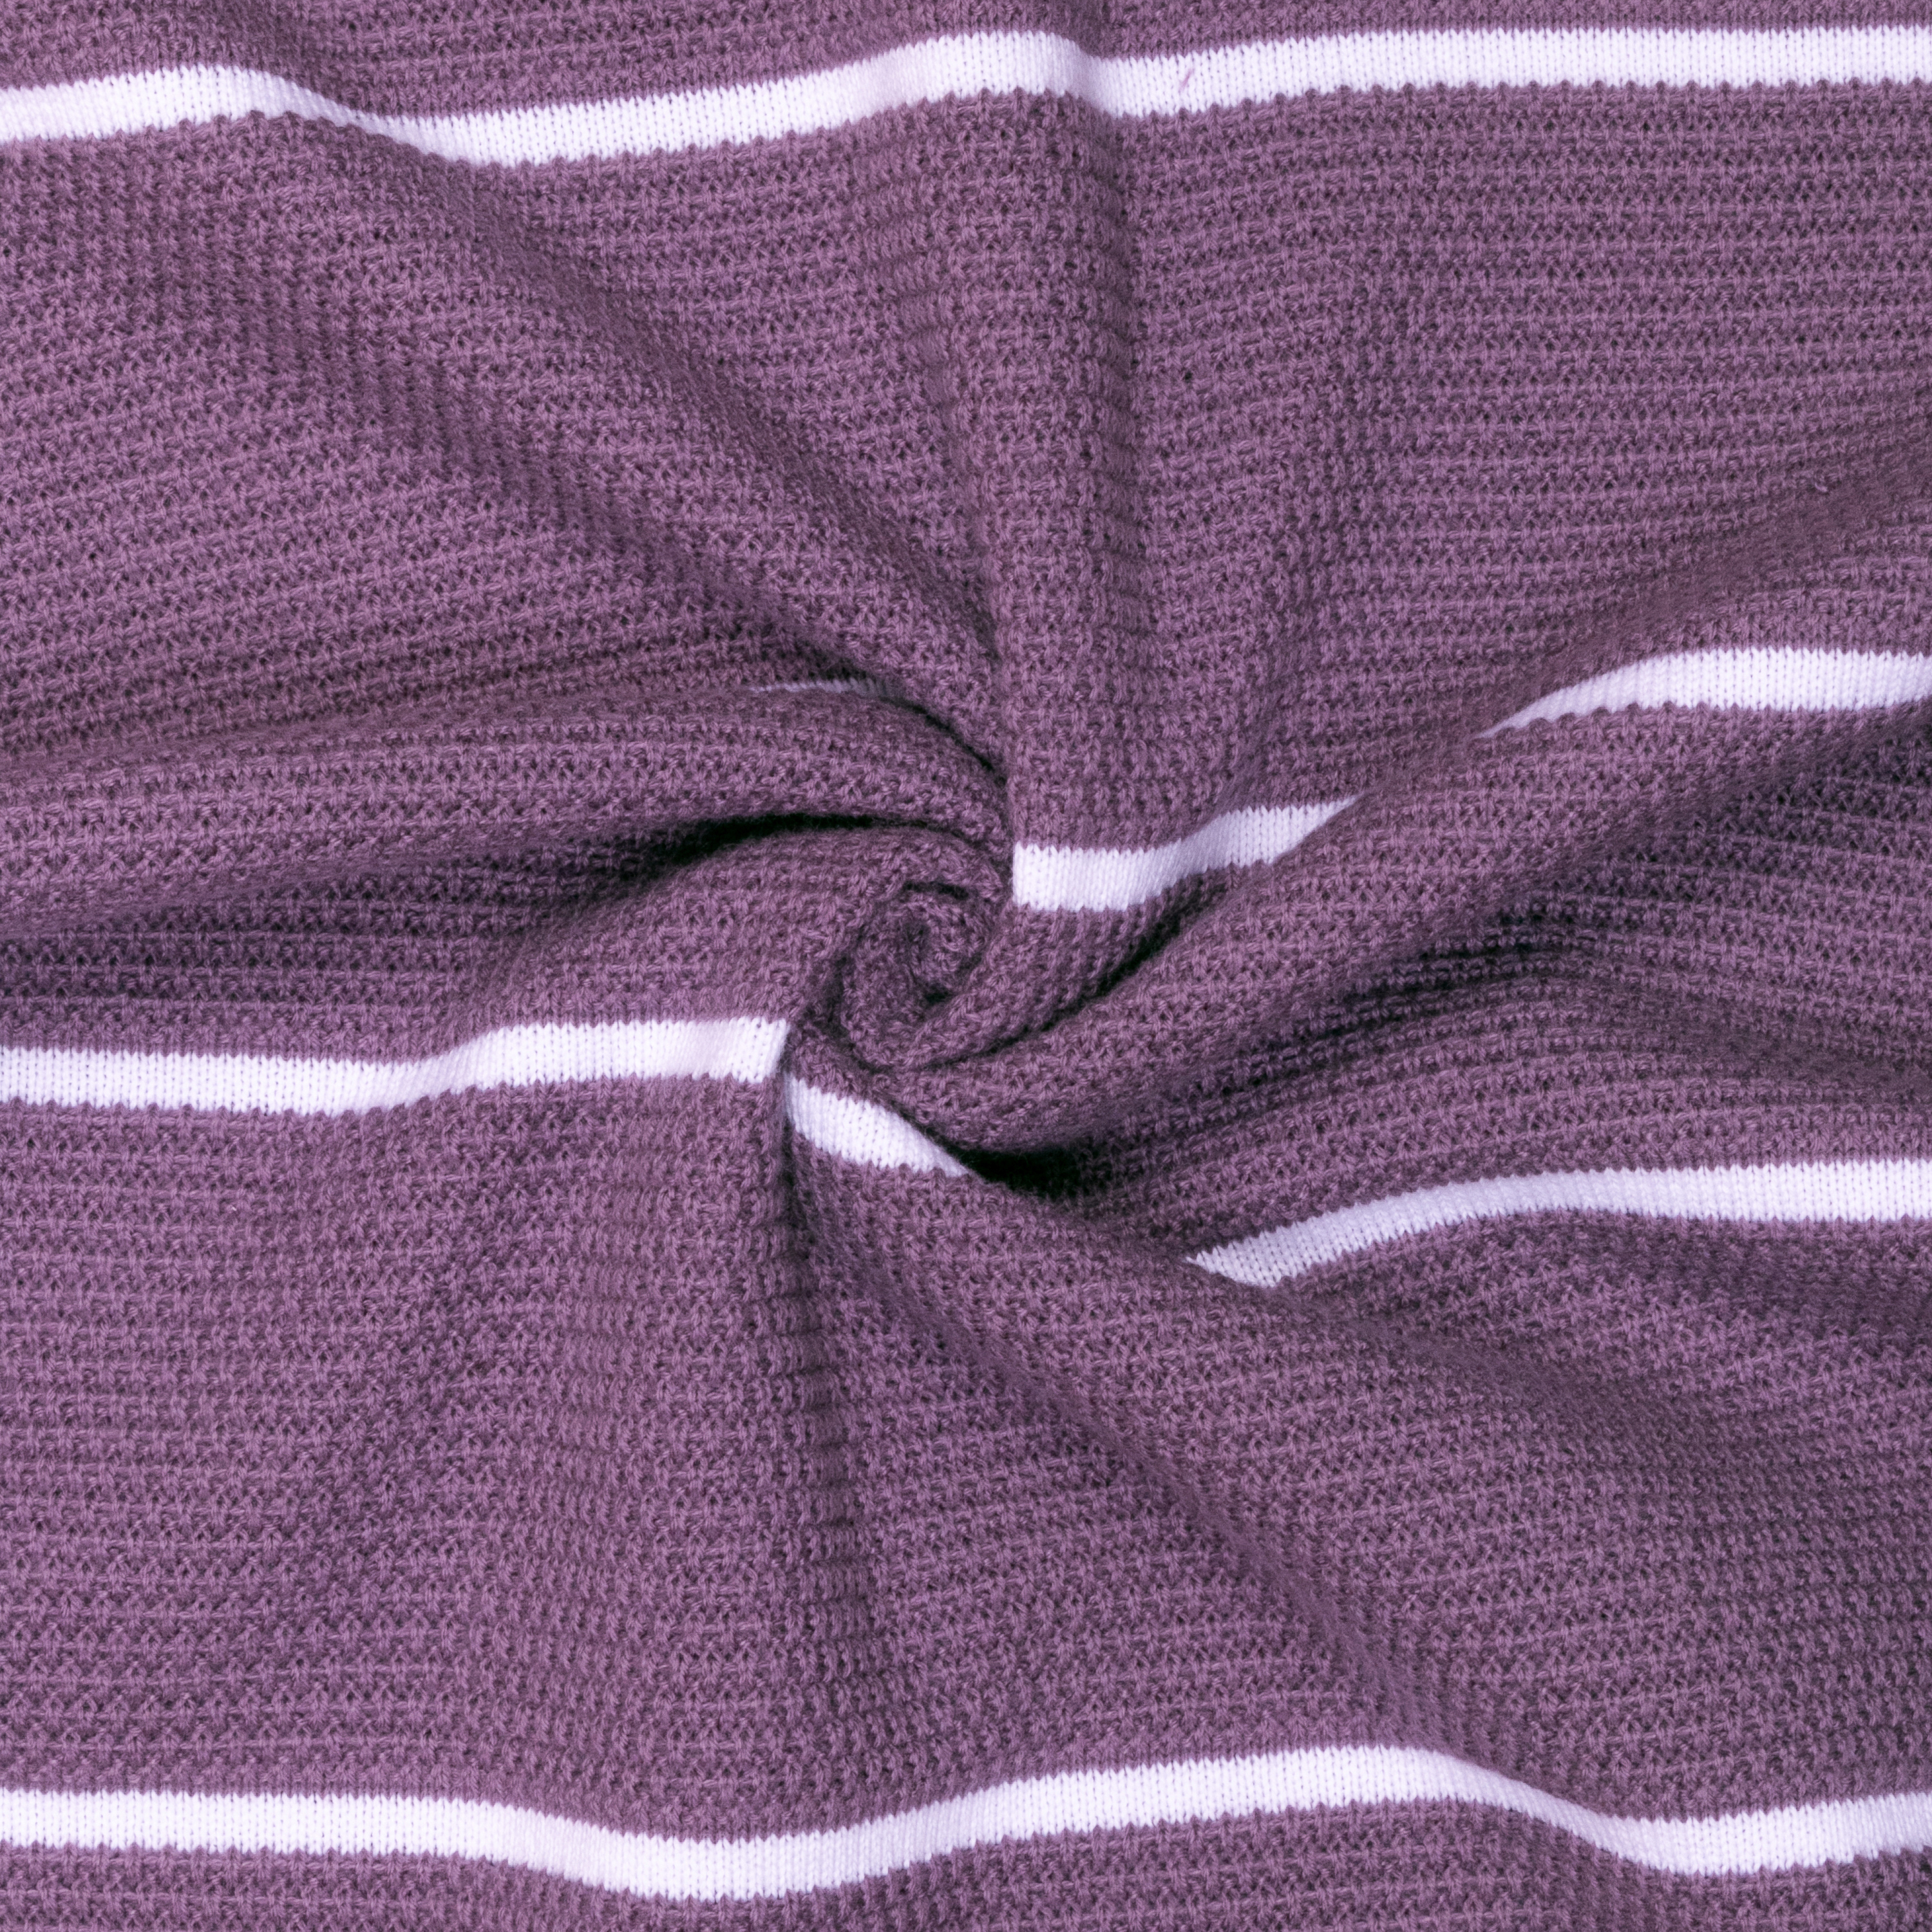 Purple and White Line Knit Strip Polo Neck T-SHirt